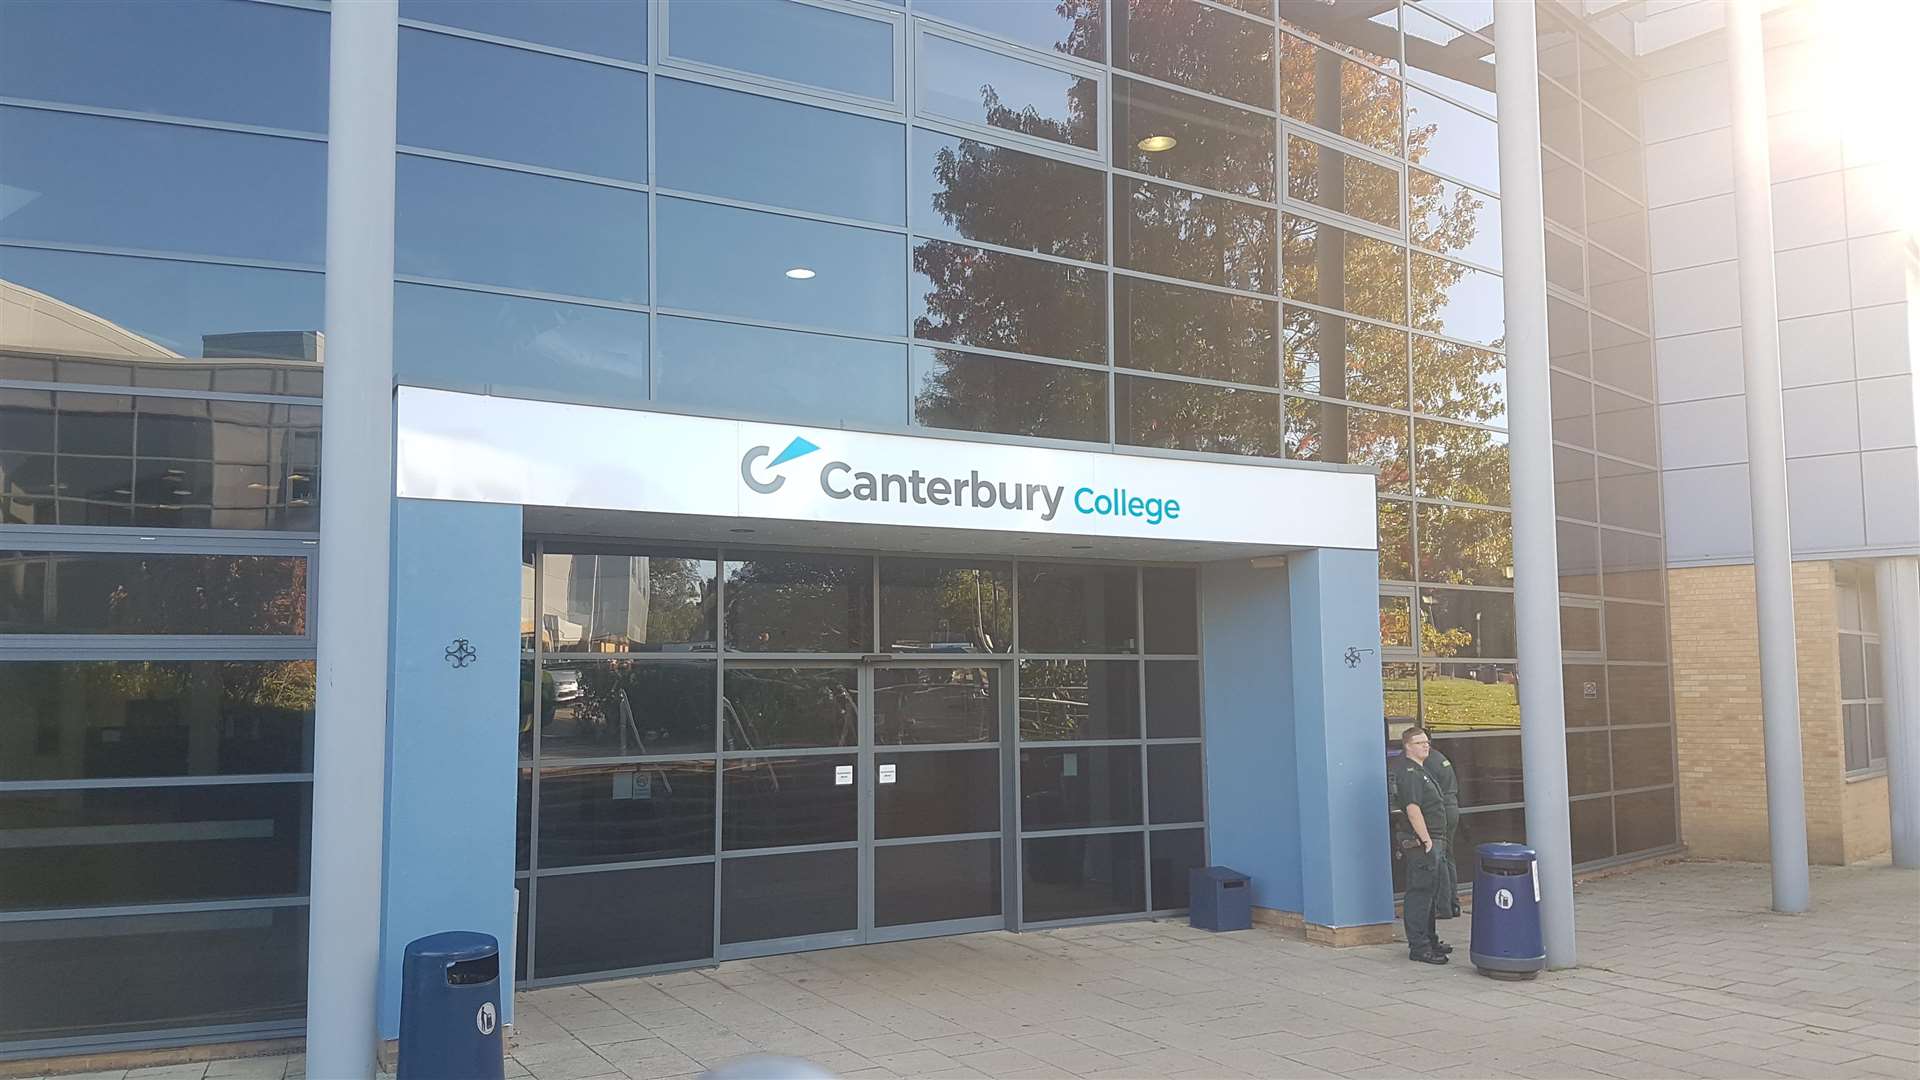 George is studying business at Canterbury College